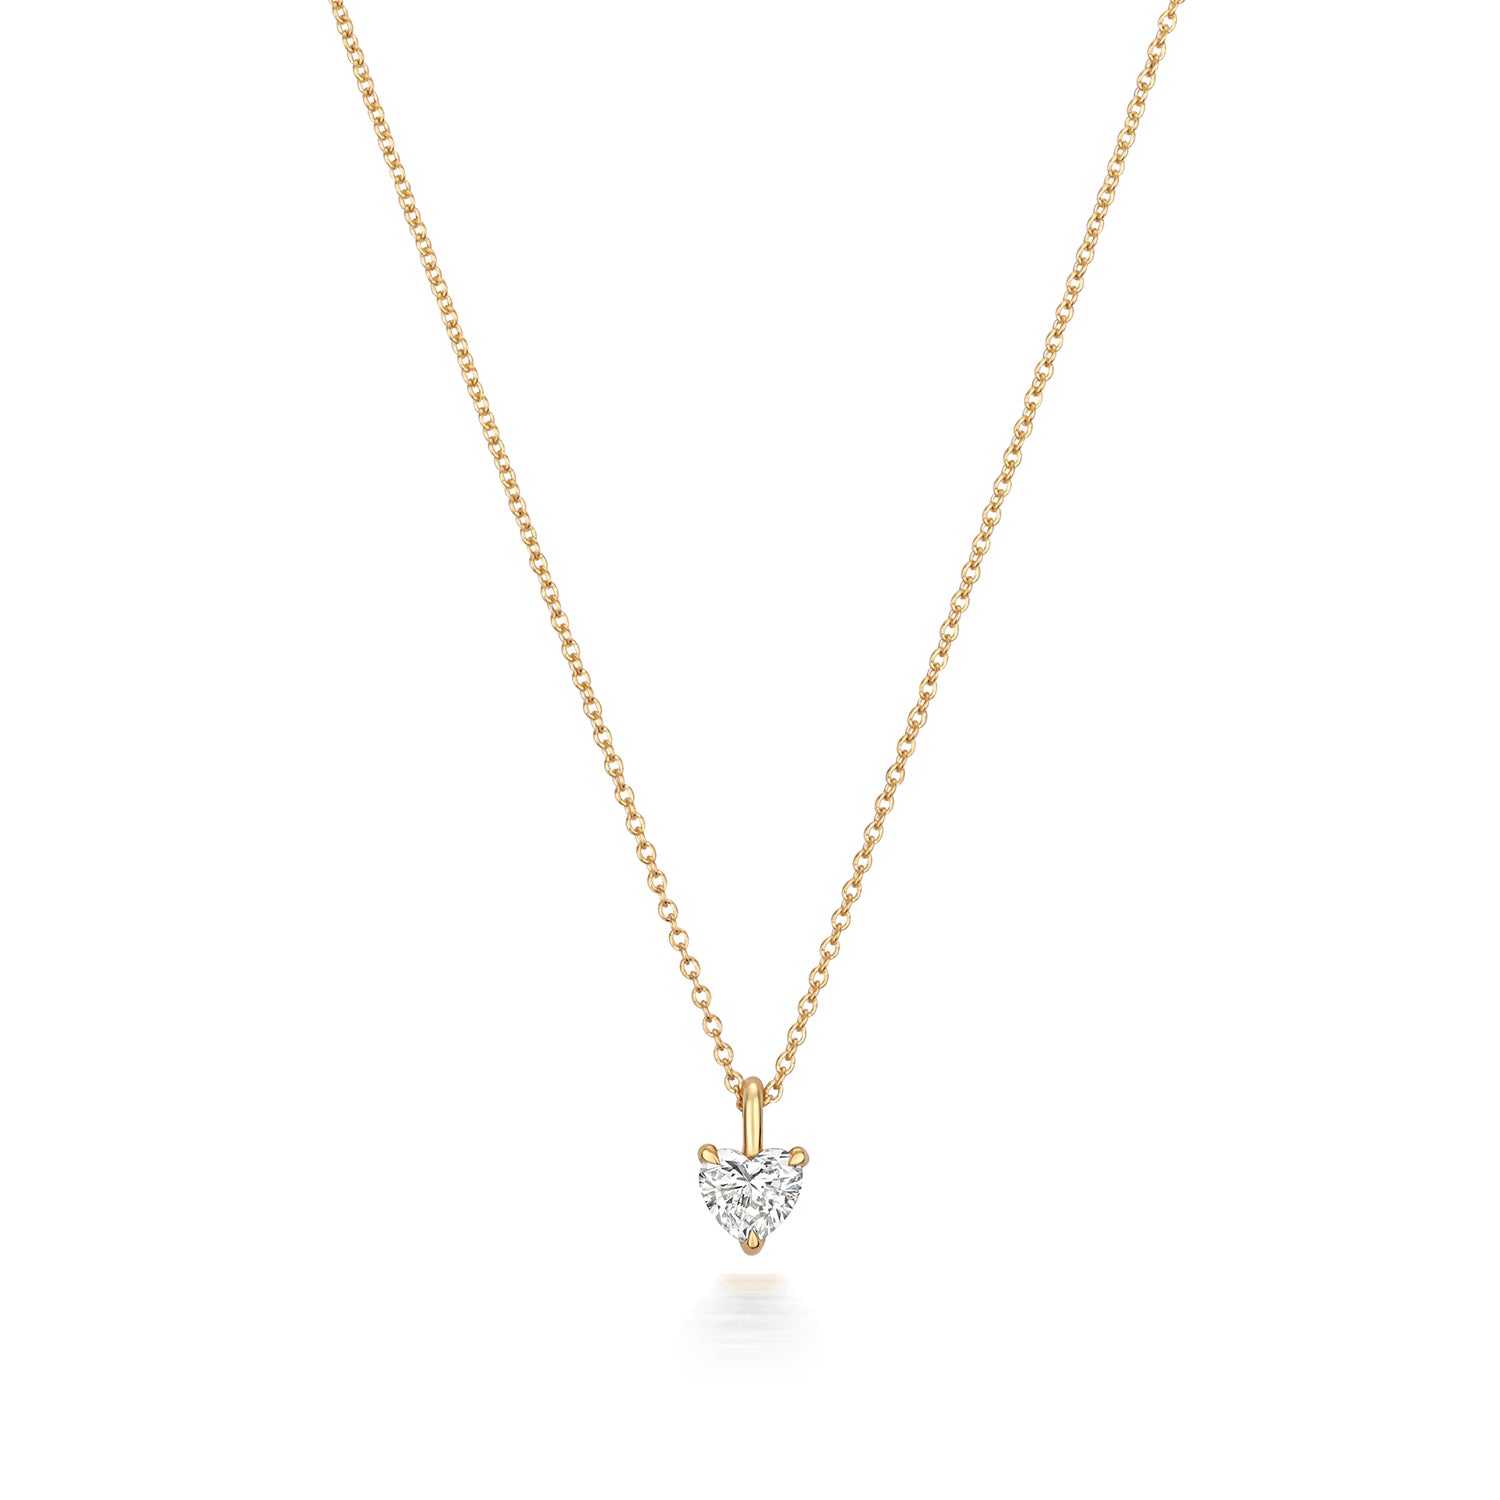 DIAMOND HEART SHAPE NECKLACE IN 18CT GOLD